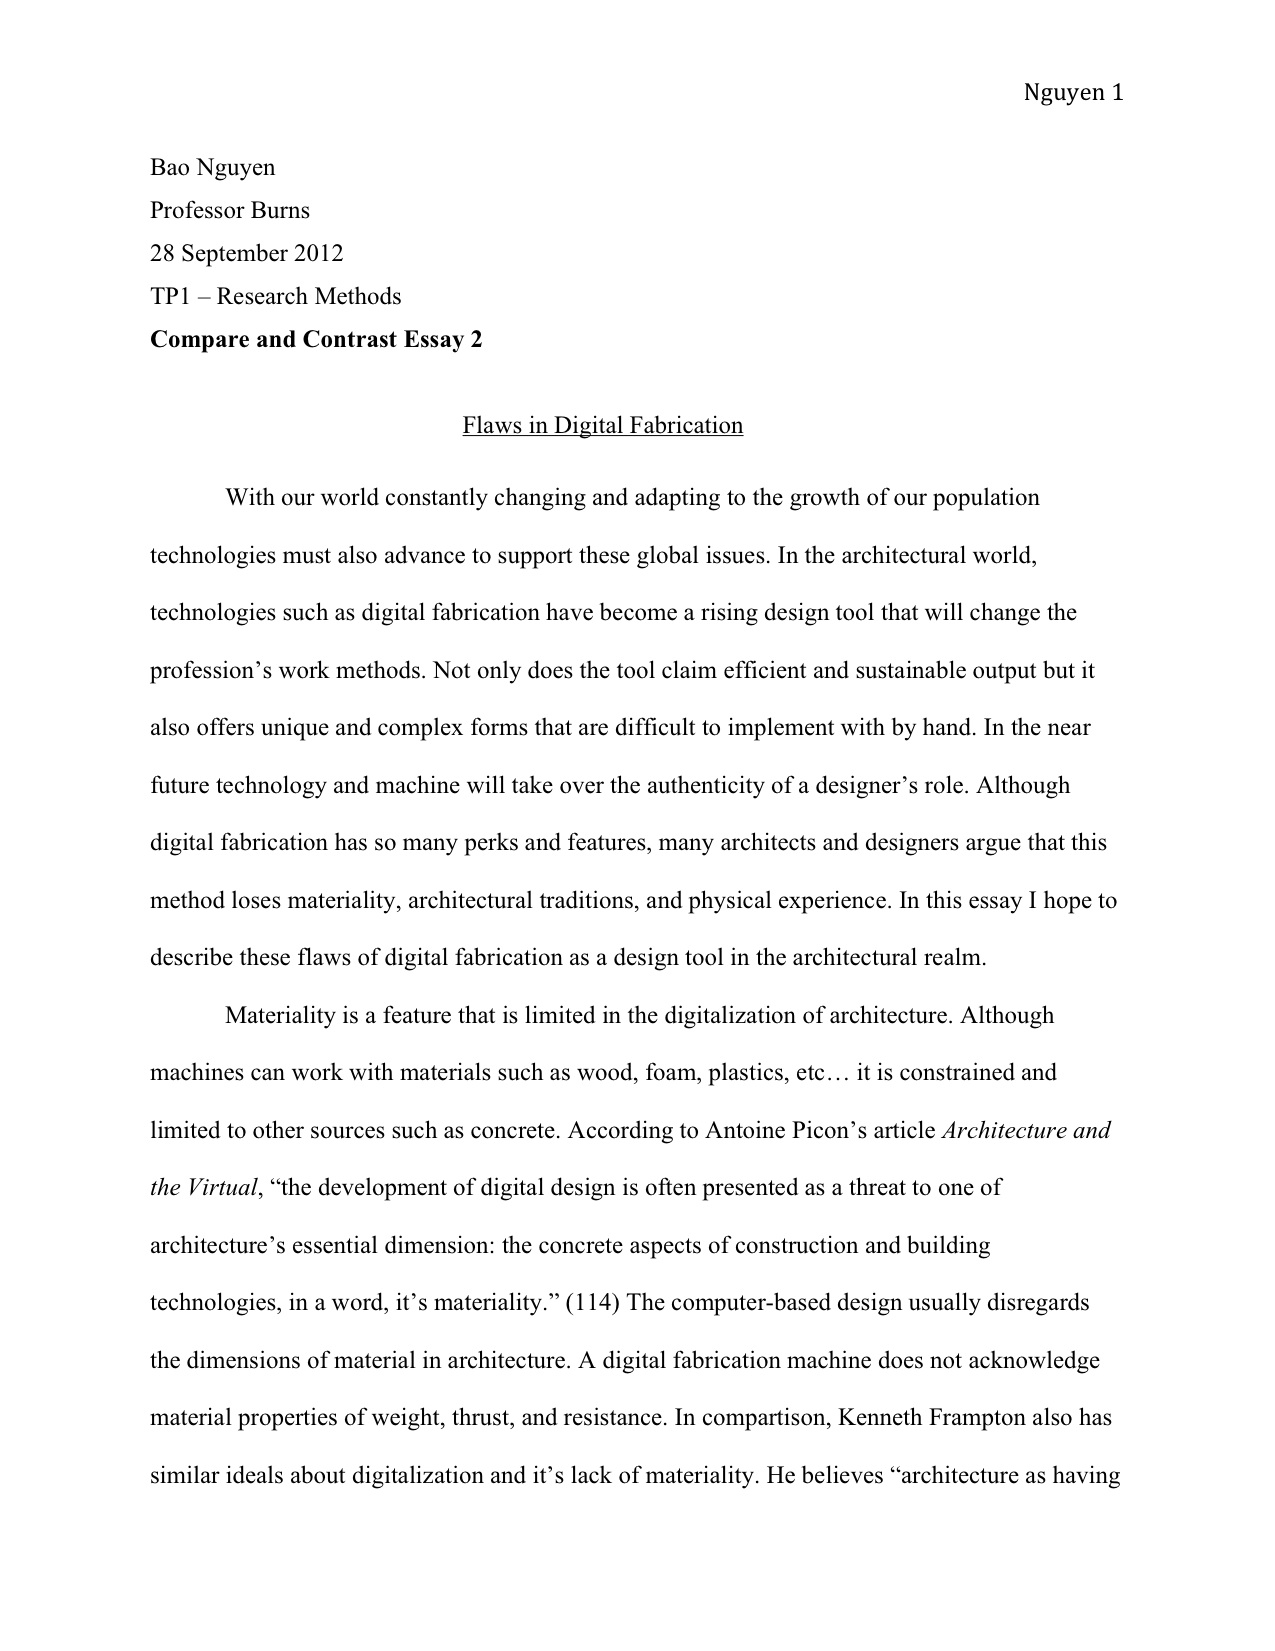 How to write a good introduction to a research paper